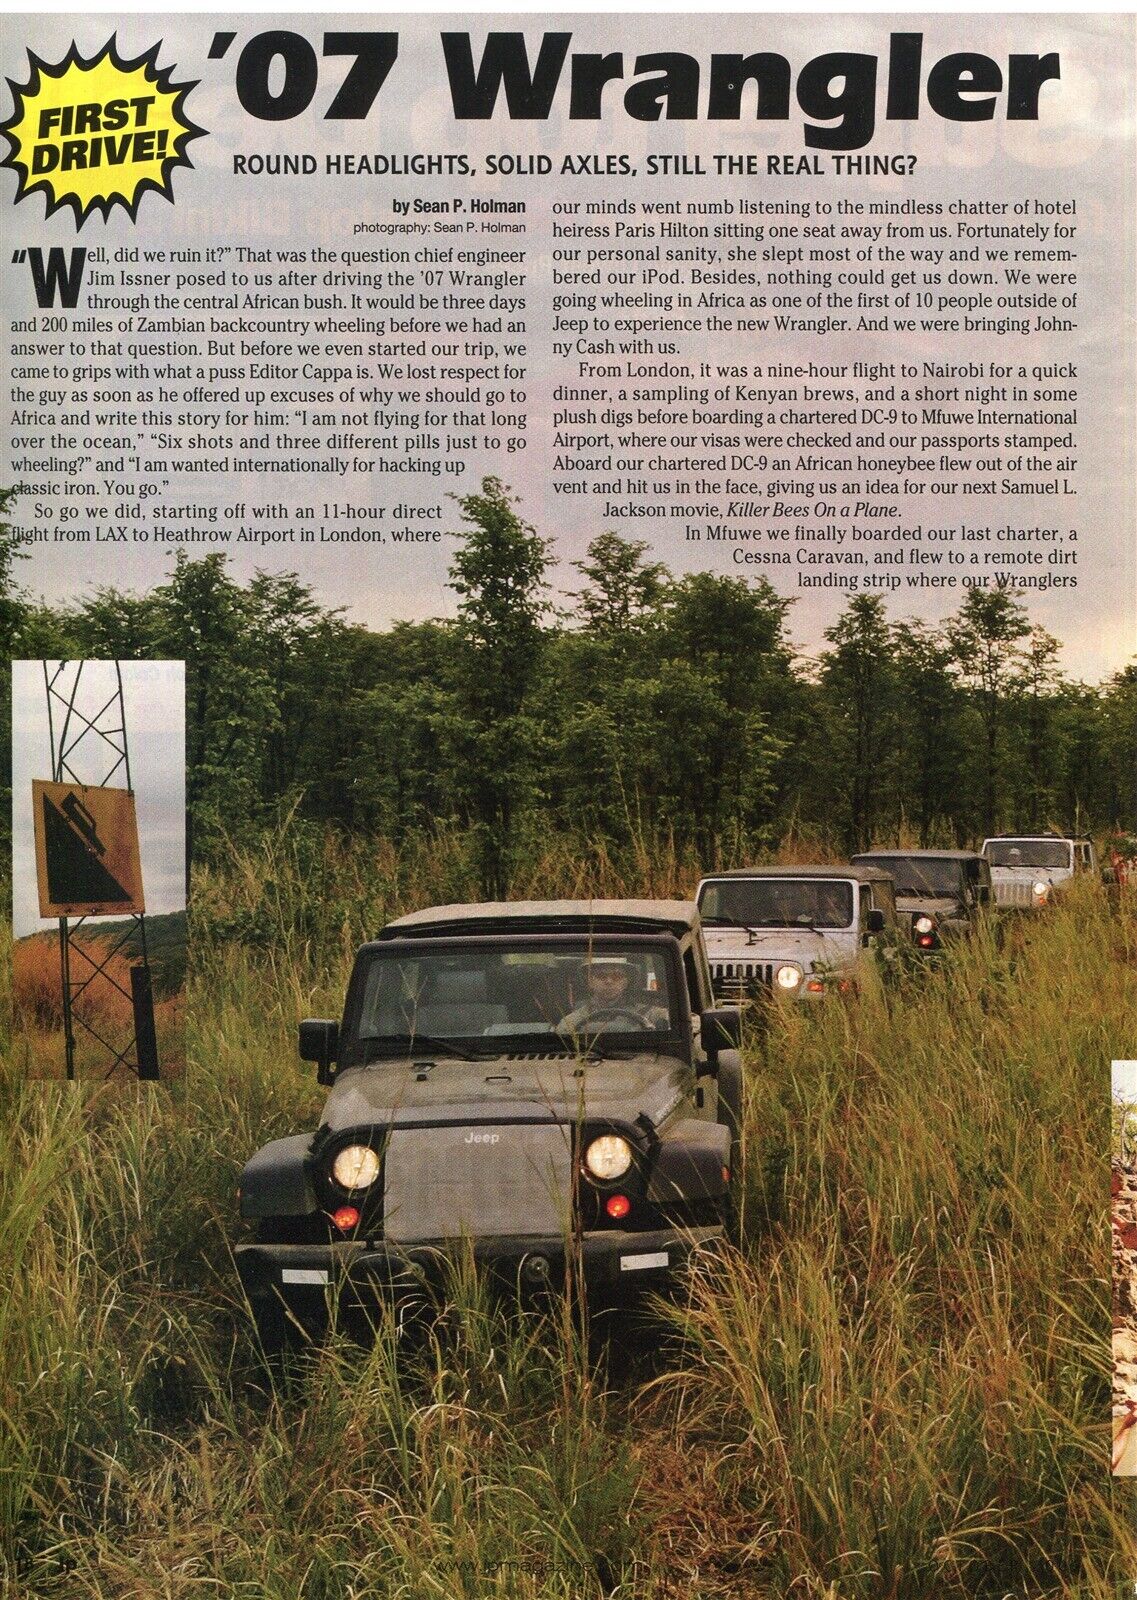 2007  JEEP WRANGLER RUBICON ROAD TEST  4x4  4 pg COLOR Article